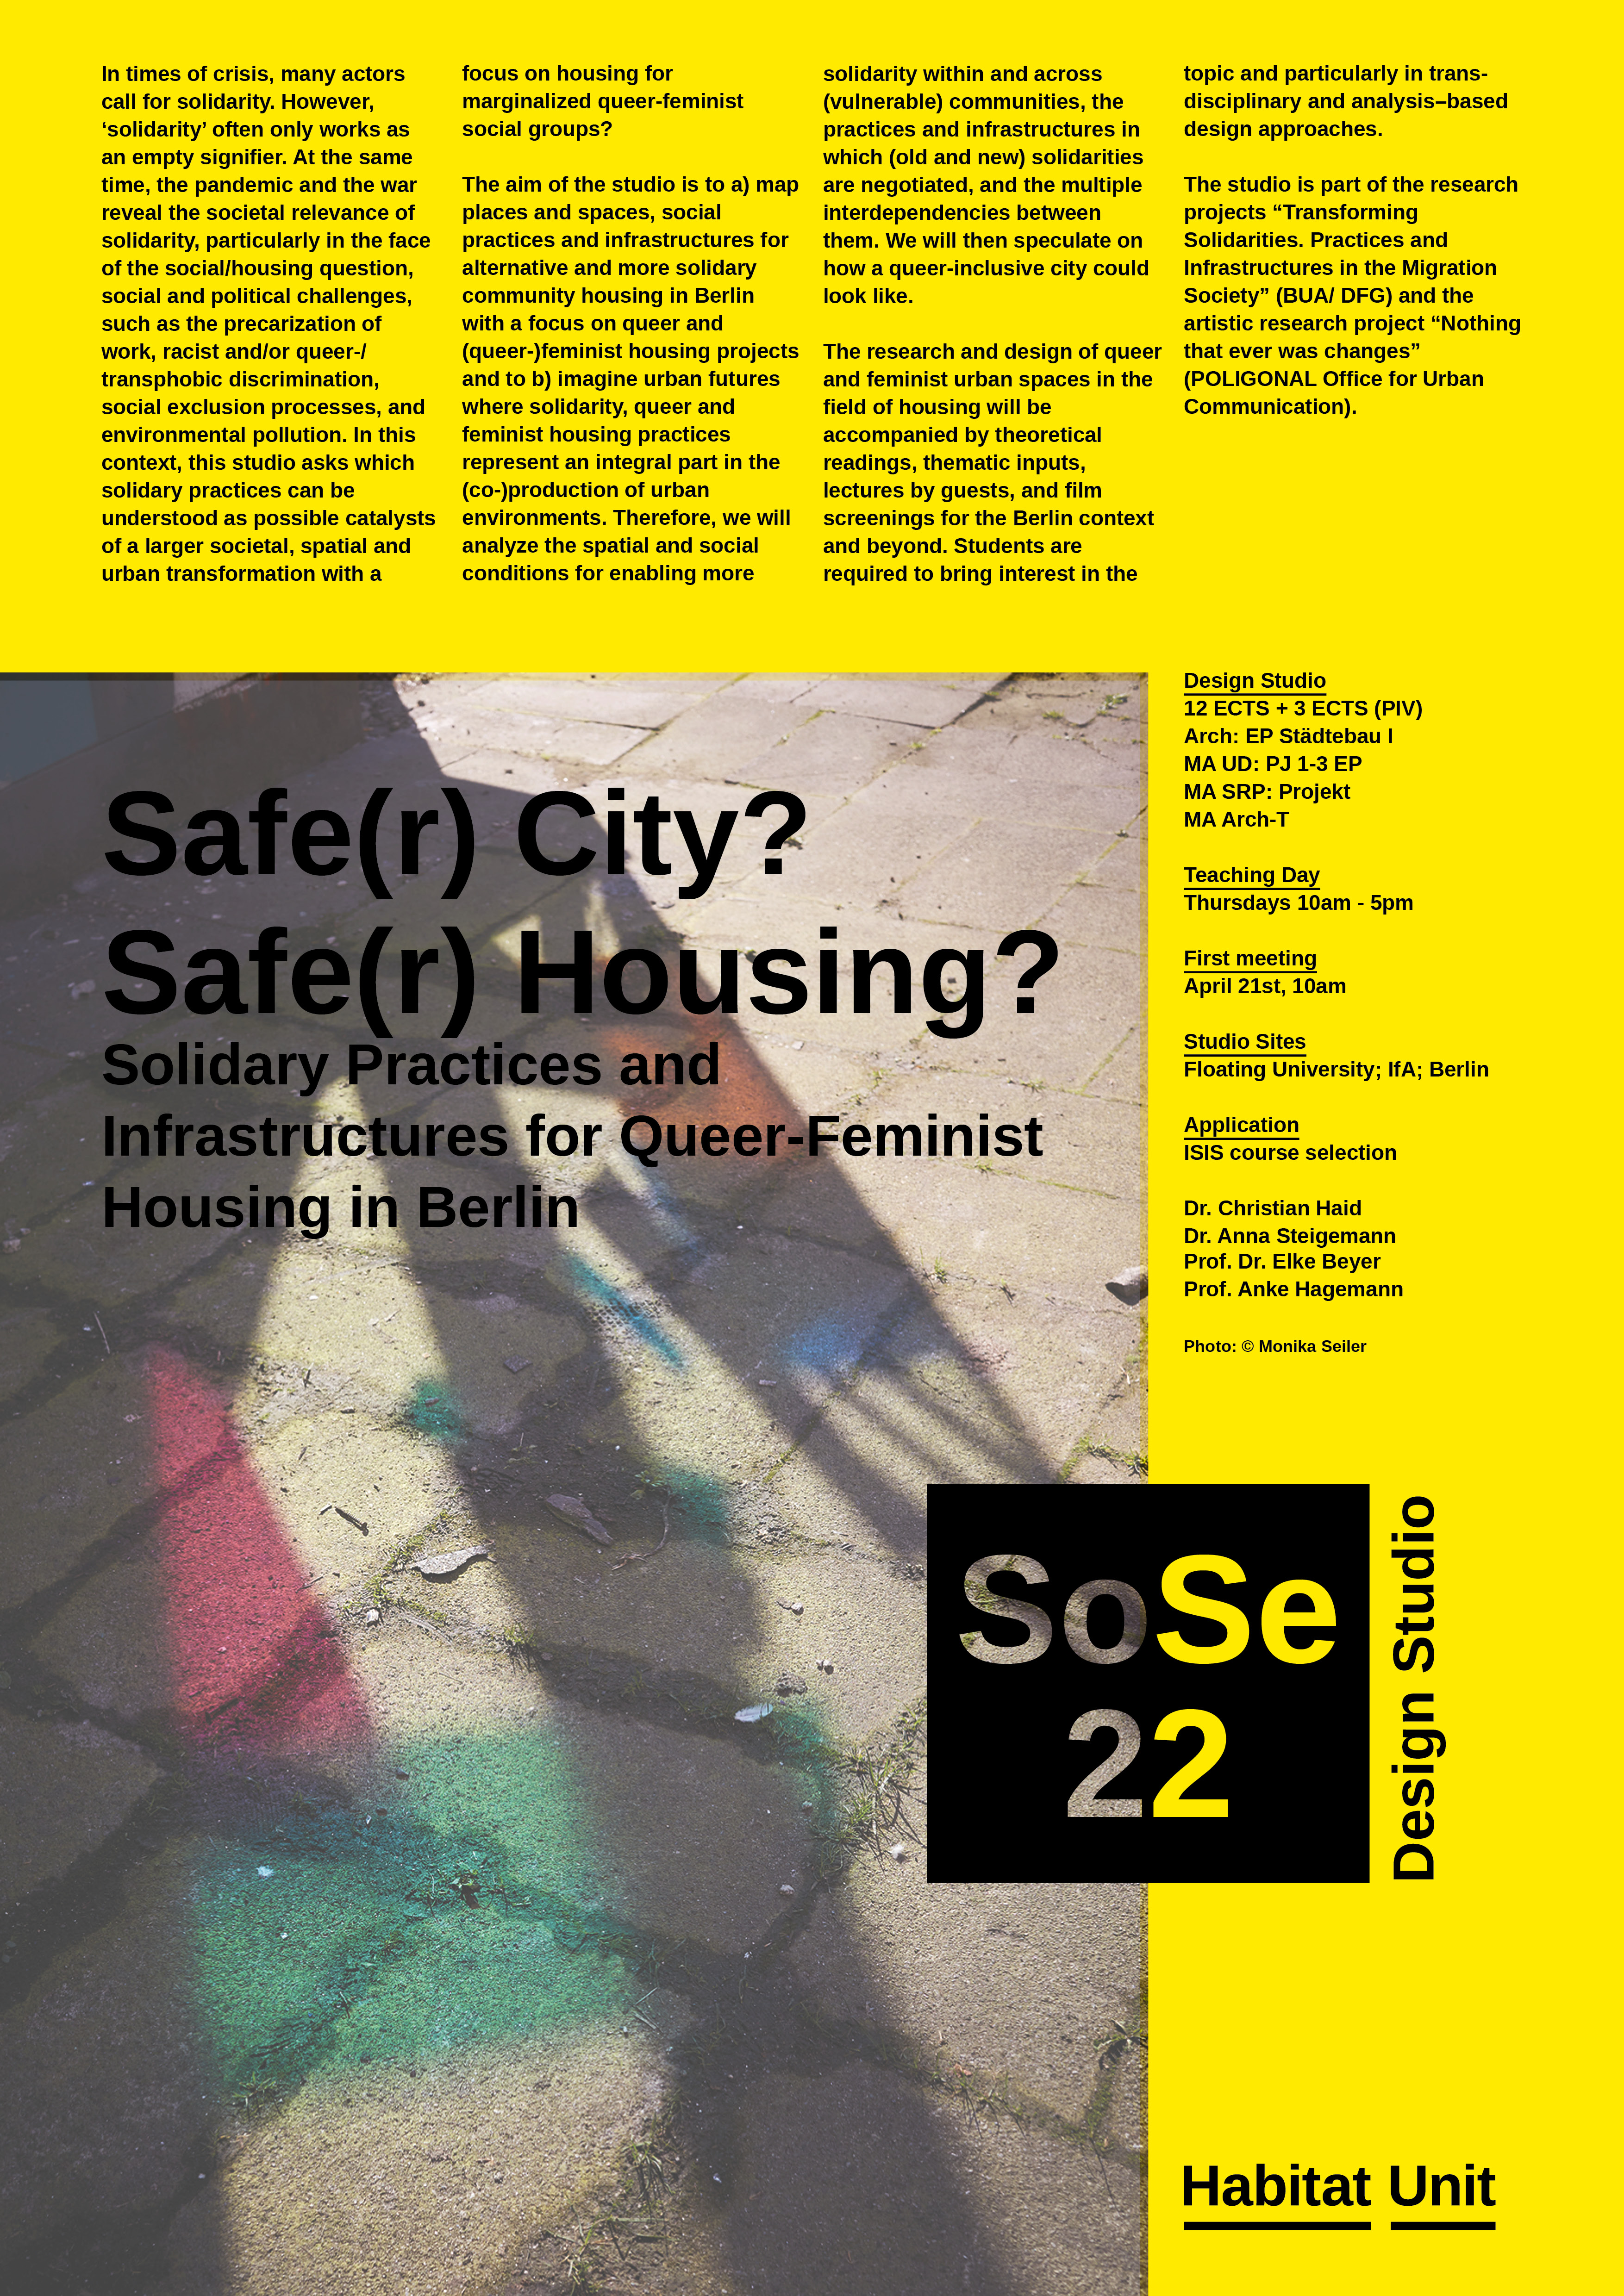 SS2022 Safe(r) City Poster new